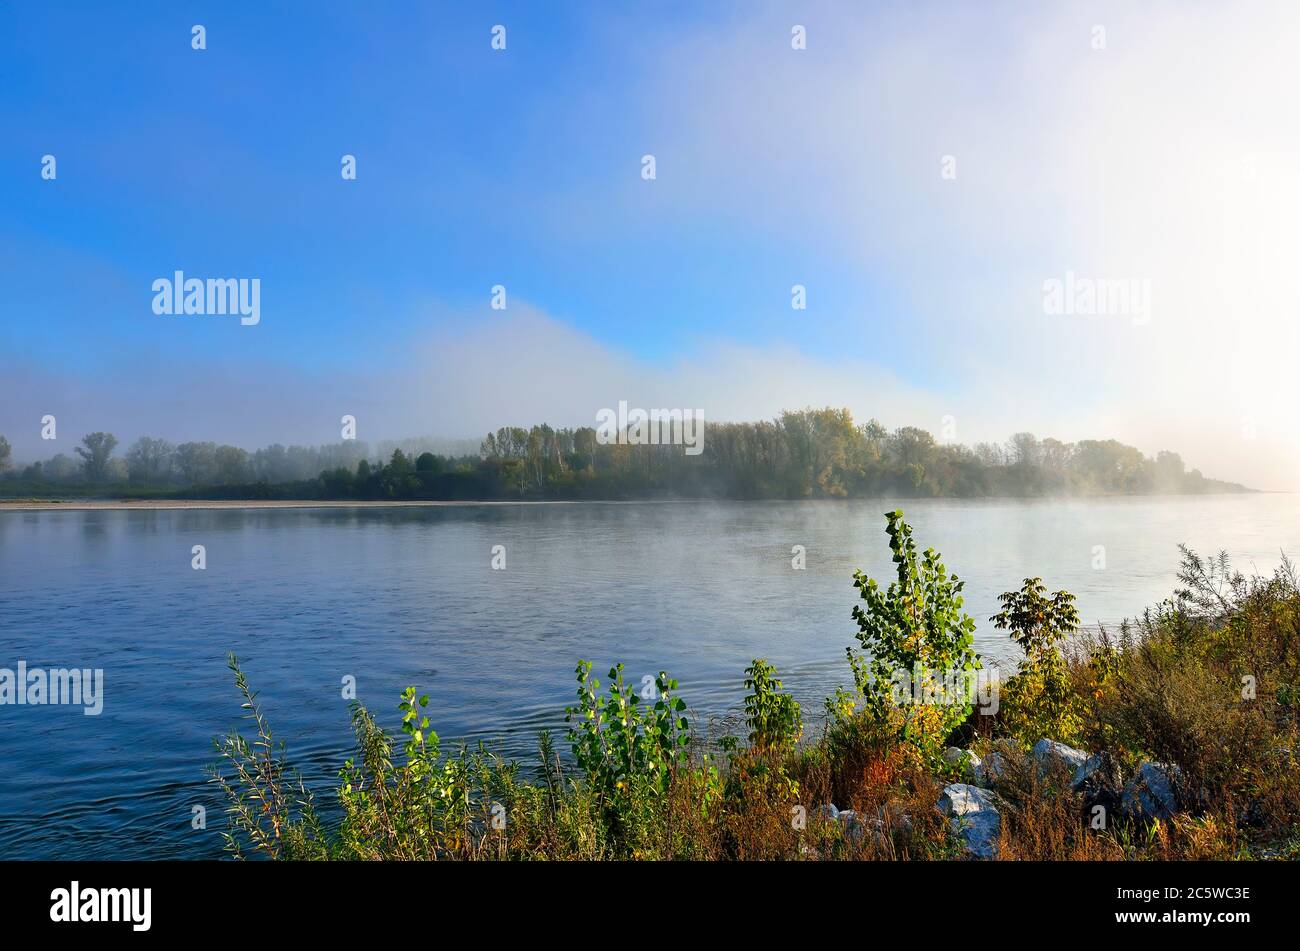 Early foggy morning over the river - beautiful summer landscape. Thick fog over the forest on the bank - freshness, calmness and enjoyment of nature Stock Photo